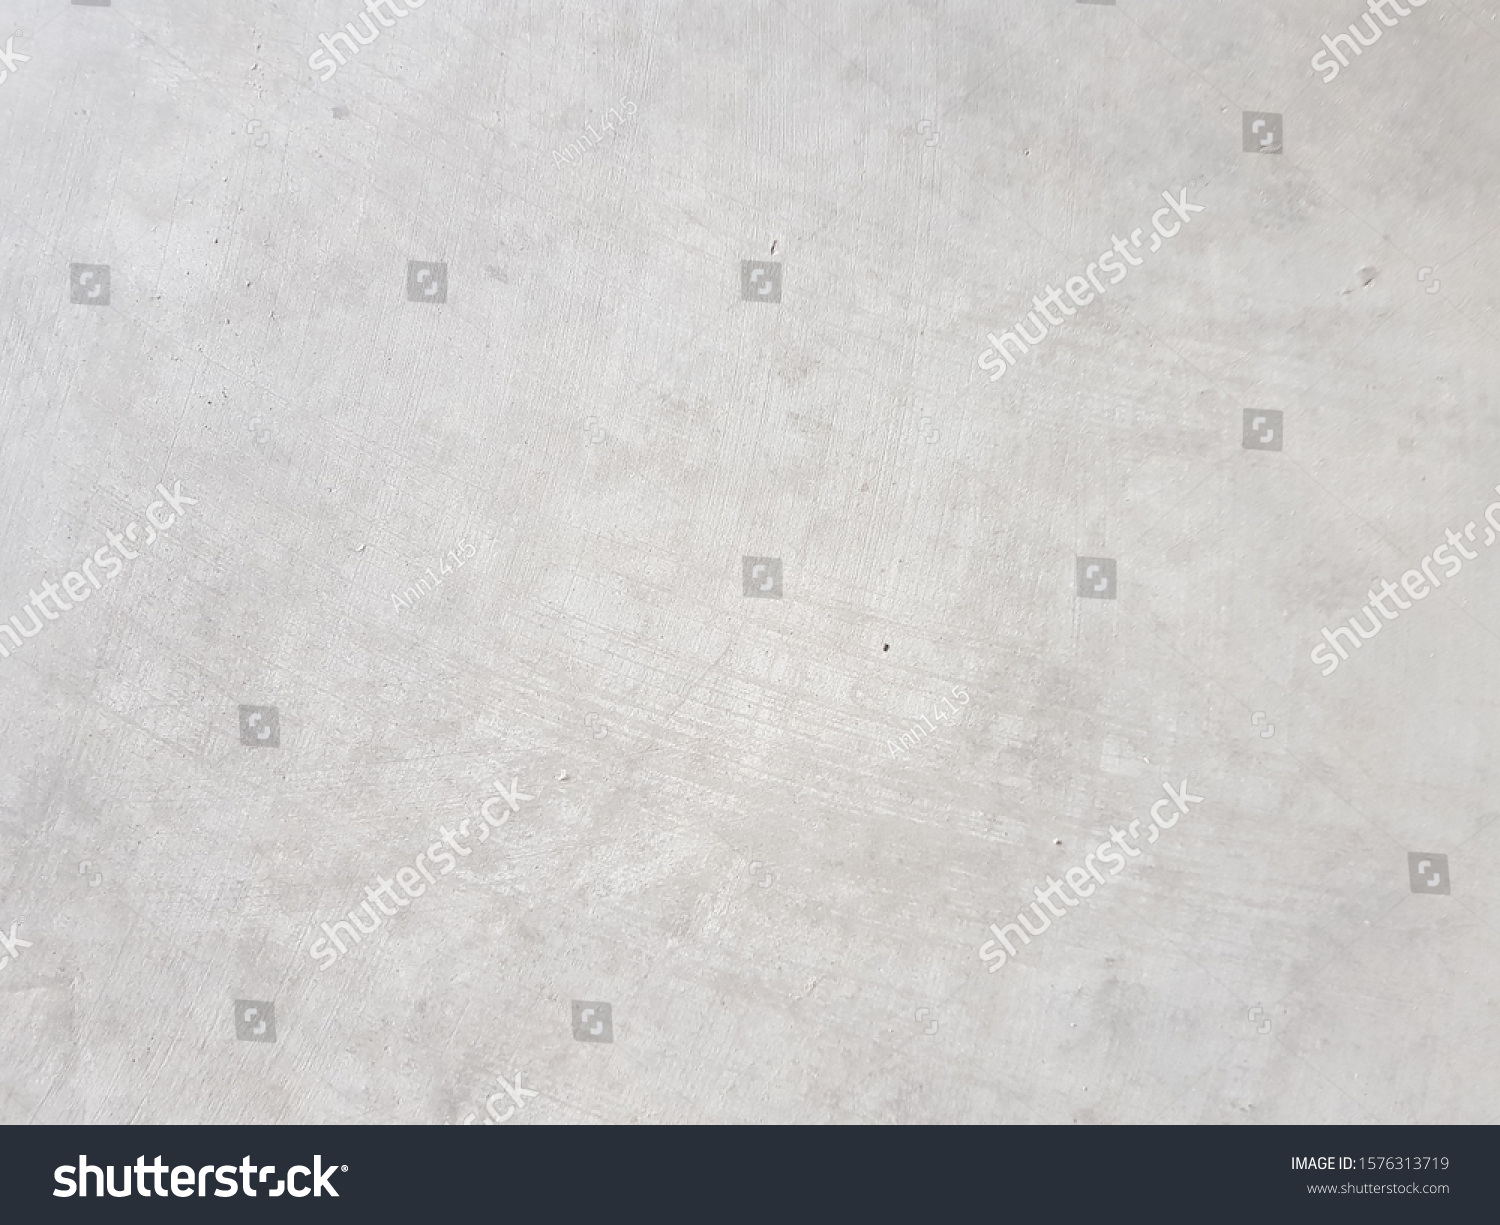 Gray clean nature vintage abstract textured urban background and wallpaper. #1576313719